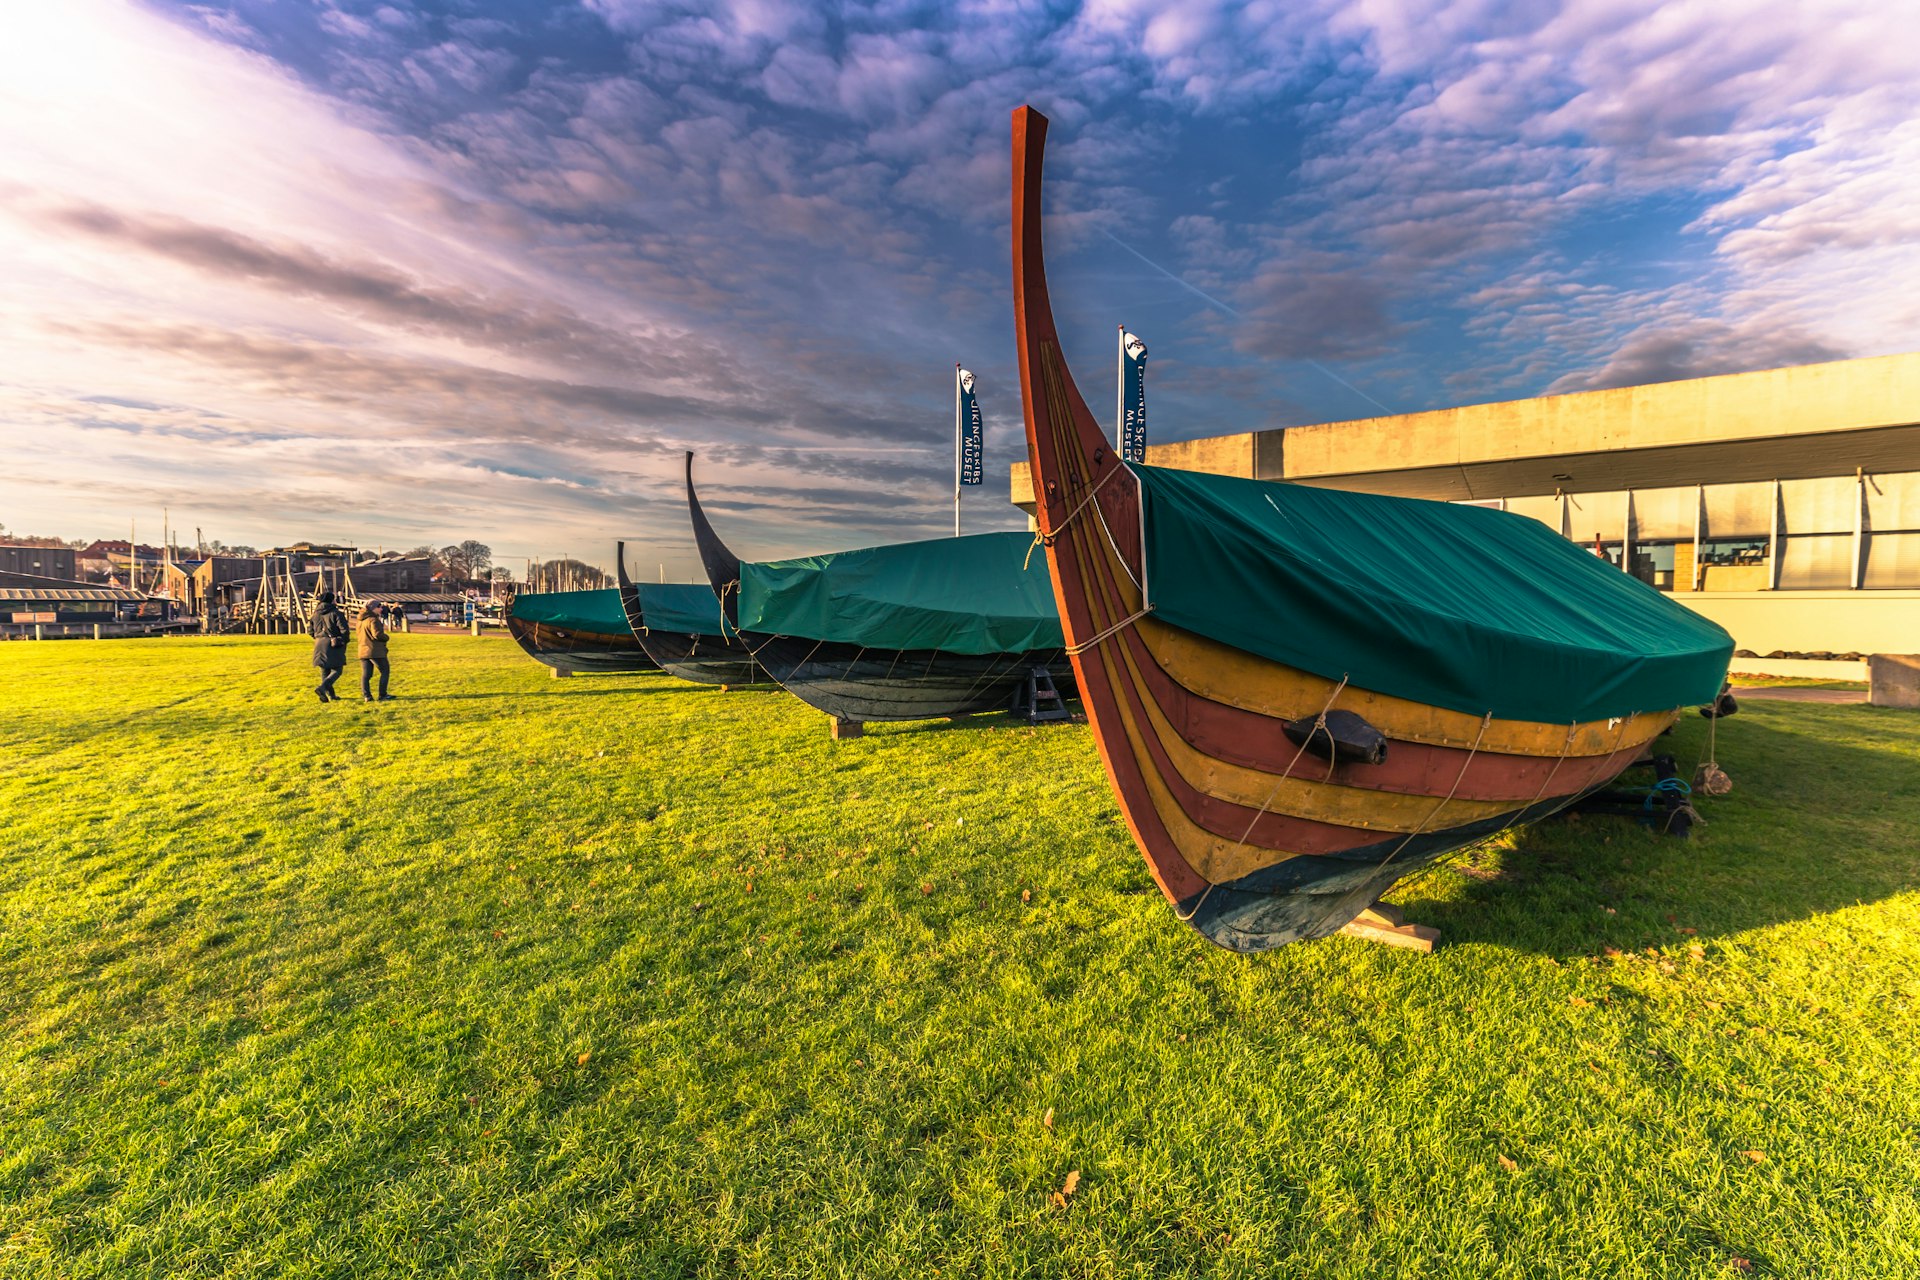 Replicas of Viking longboats sit on the grass outside the museum